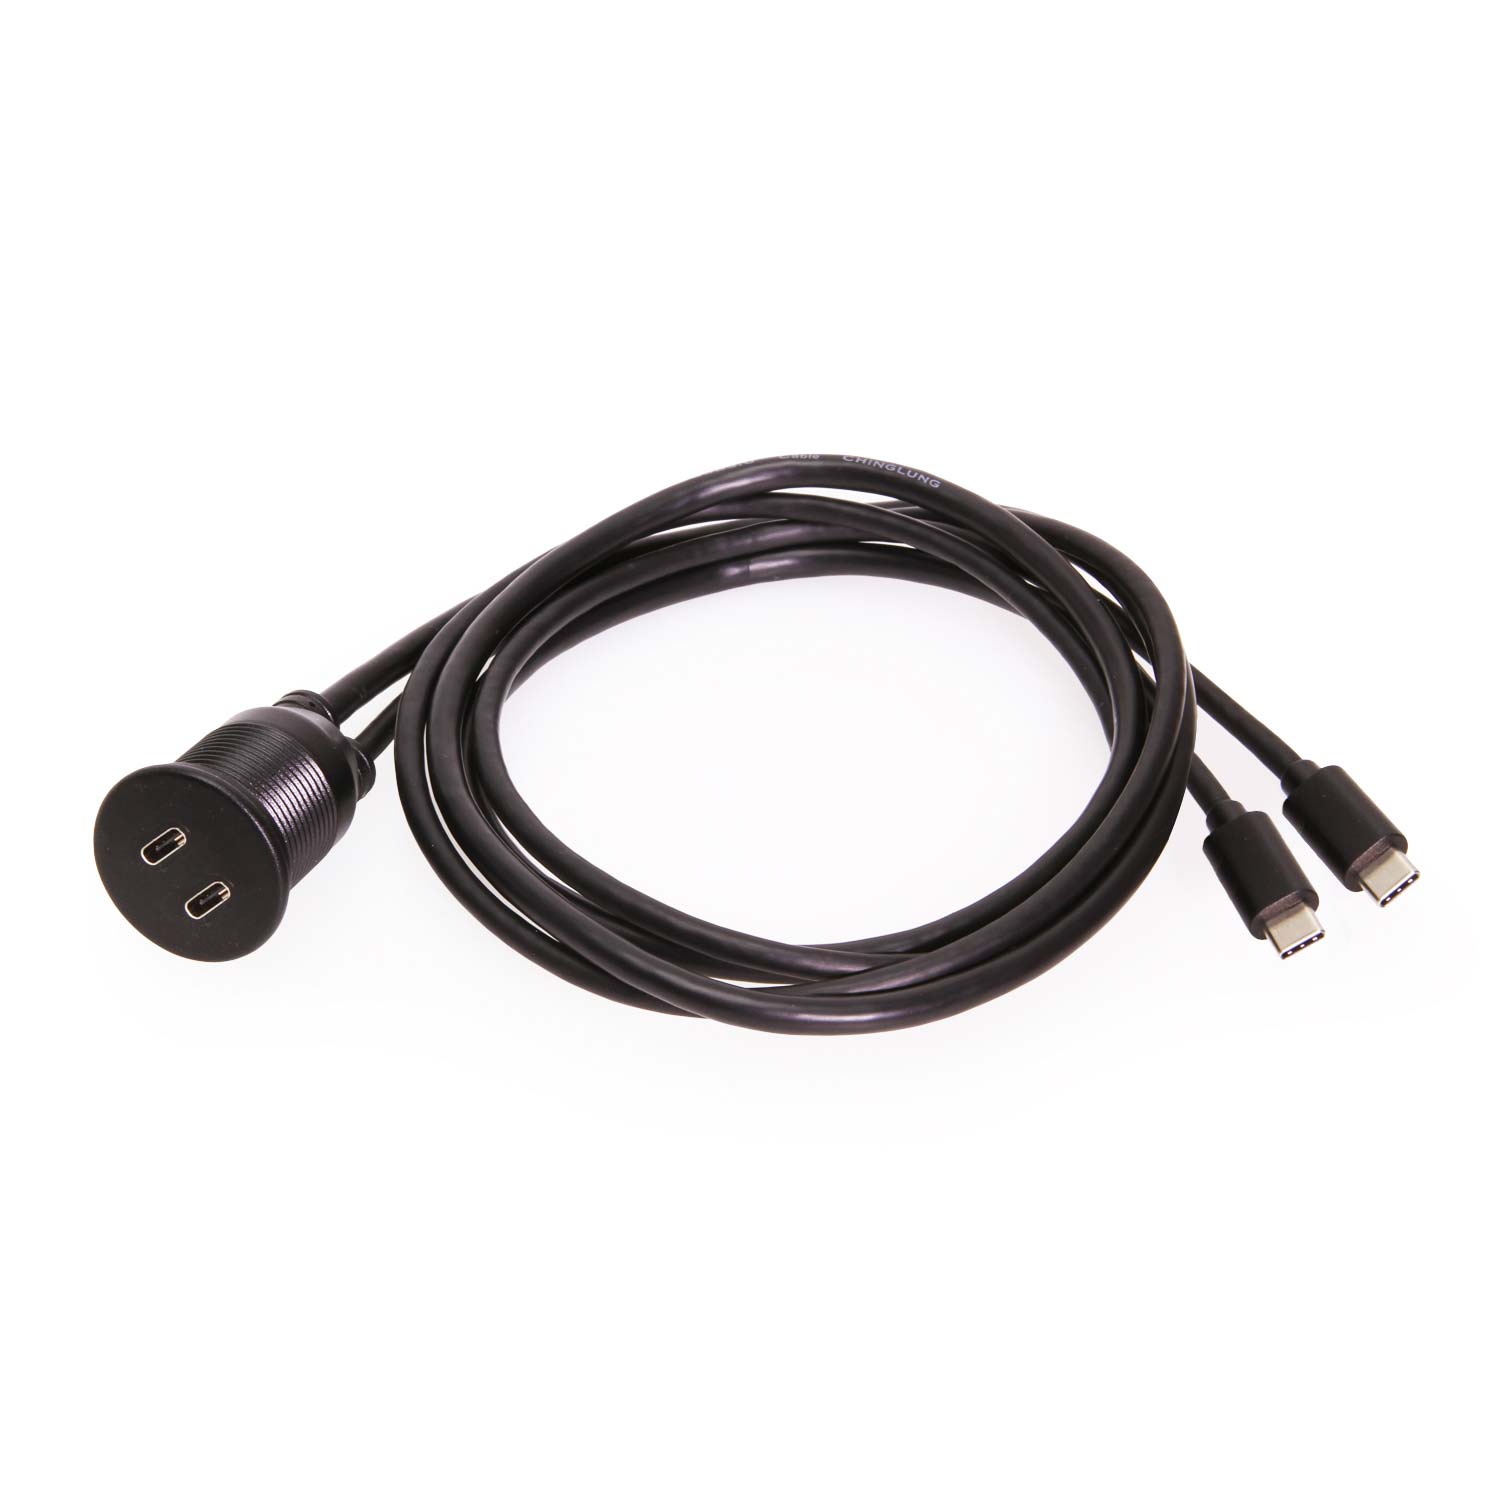 Connector Usb Extension Cable, Usb C Connector Female 2 Pin